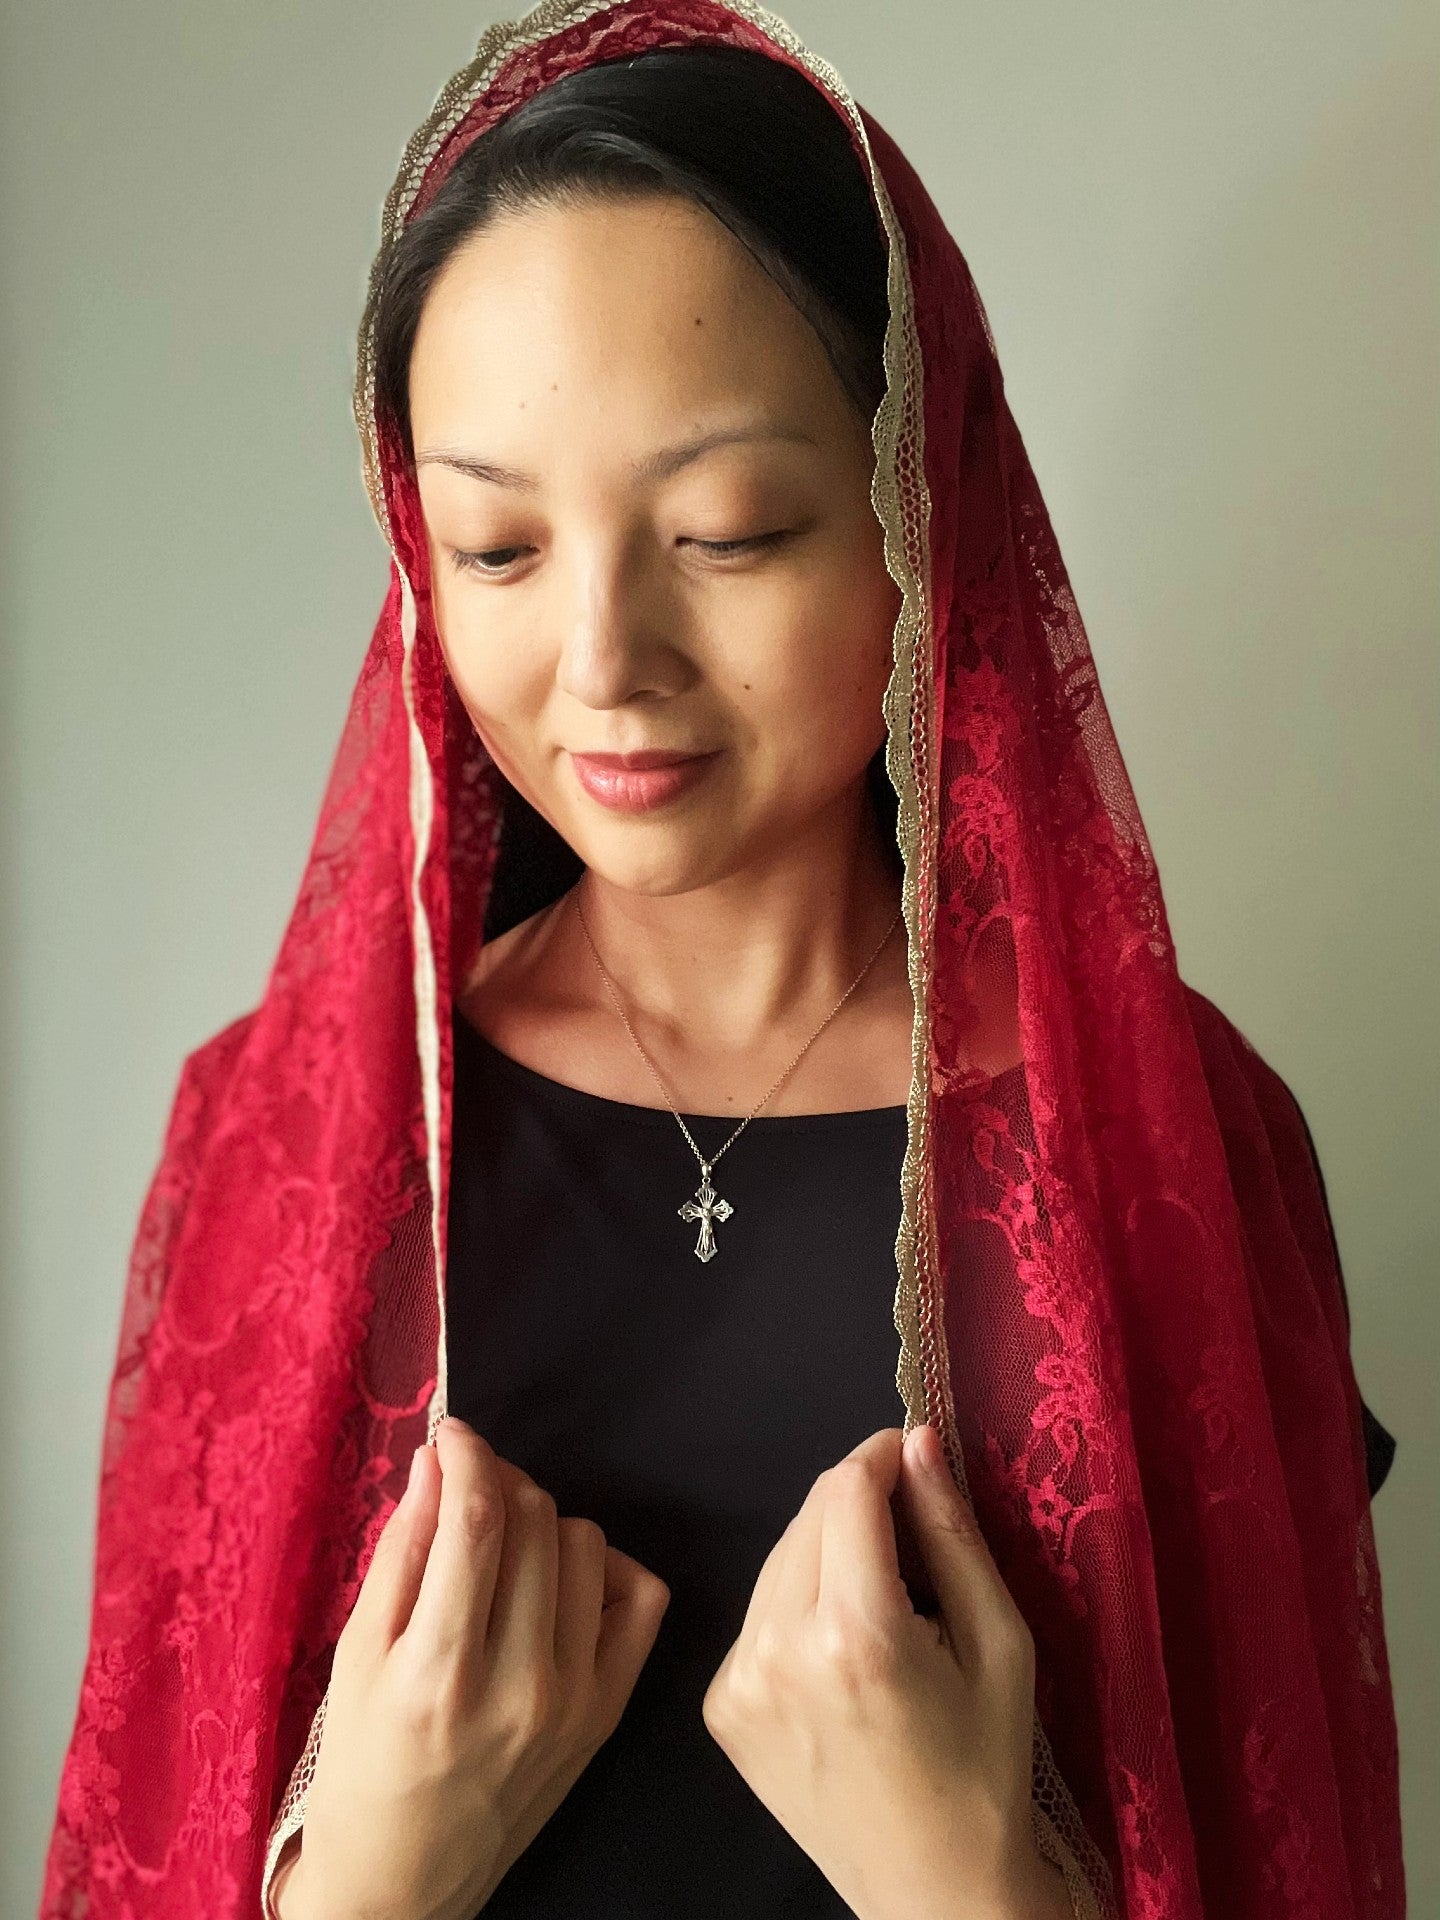 Our Lady of Hrushiv Wrap Veil (Deep Red)